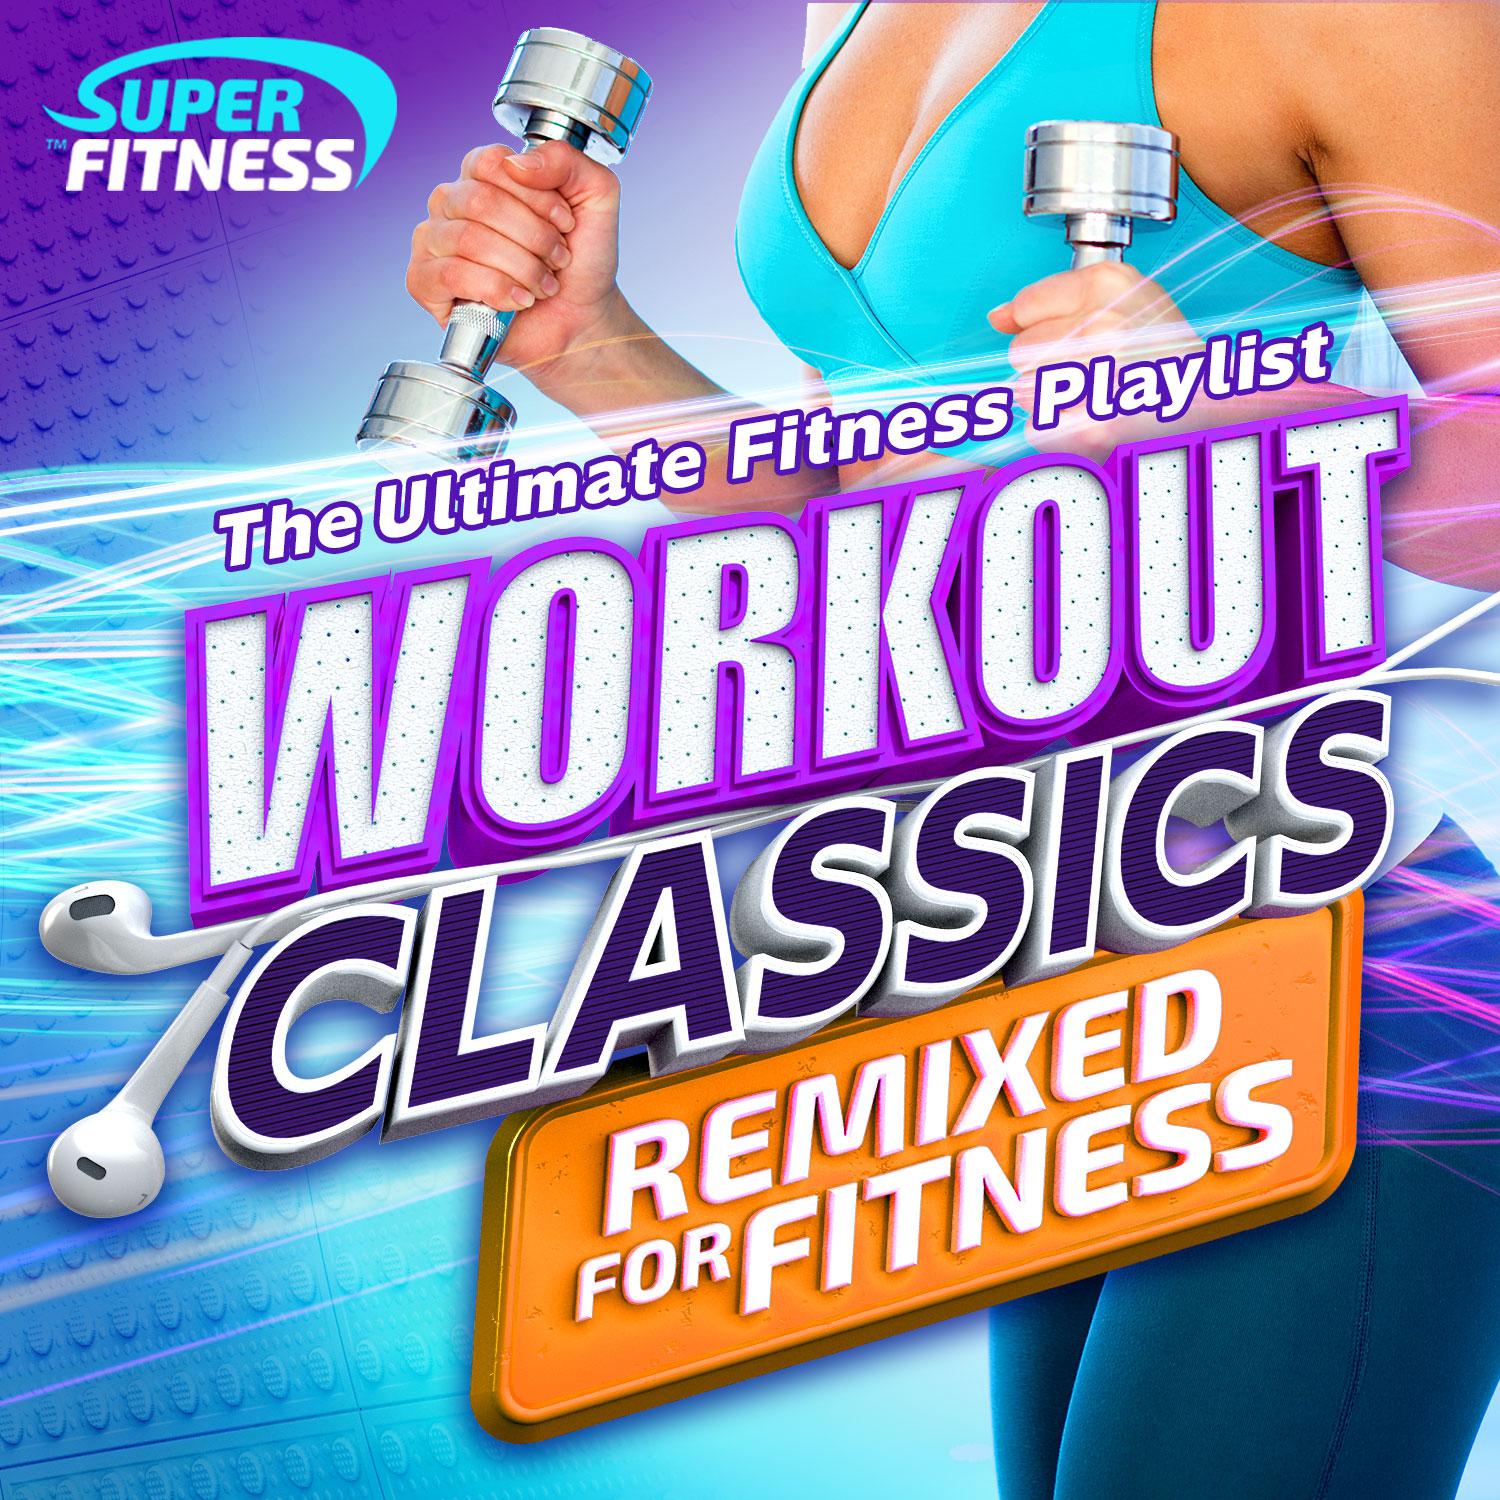 Workout Classics - The Ultimate Fitness Playlist - Remixed for Fitness!